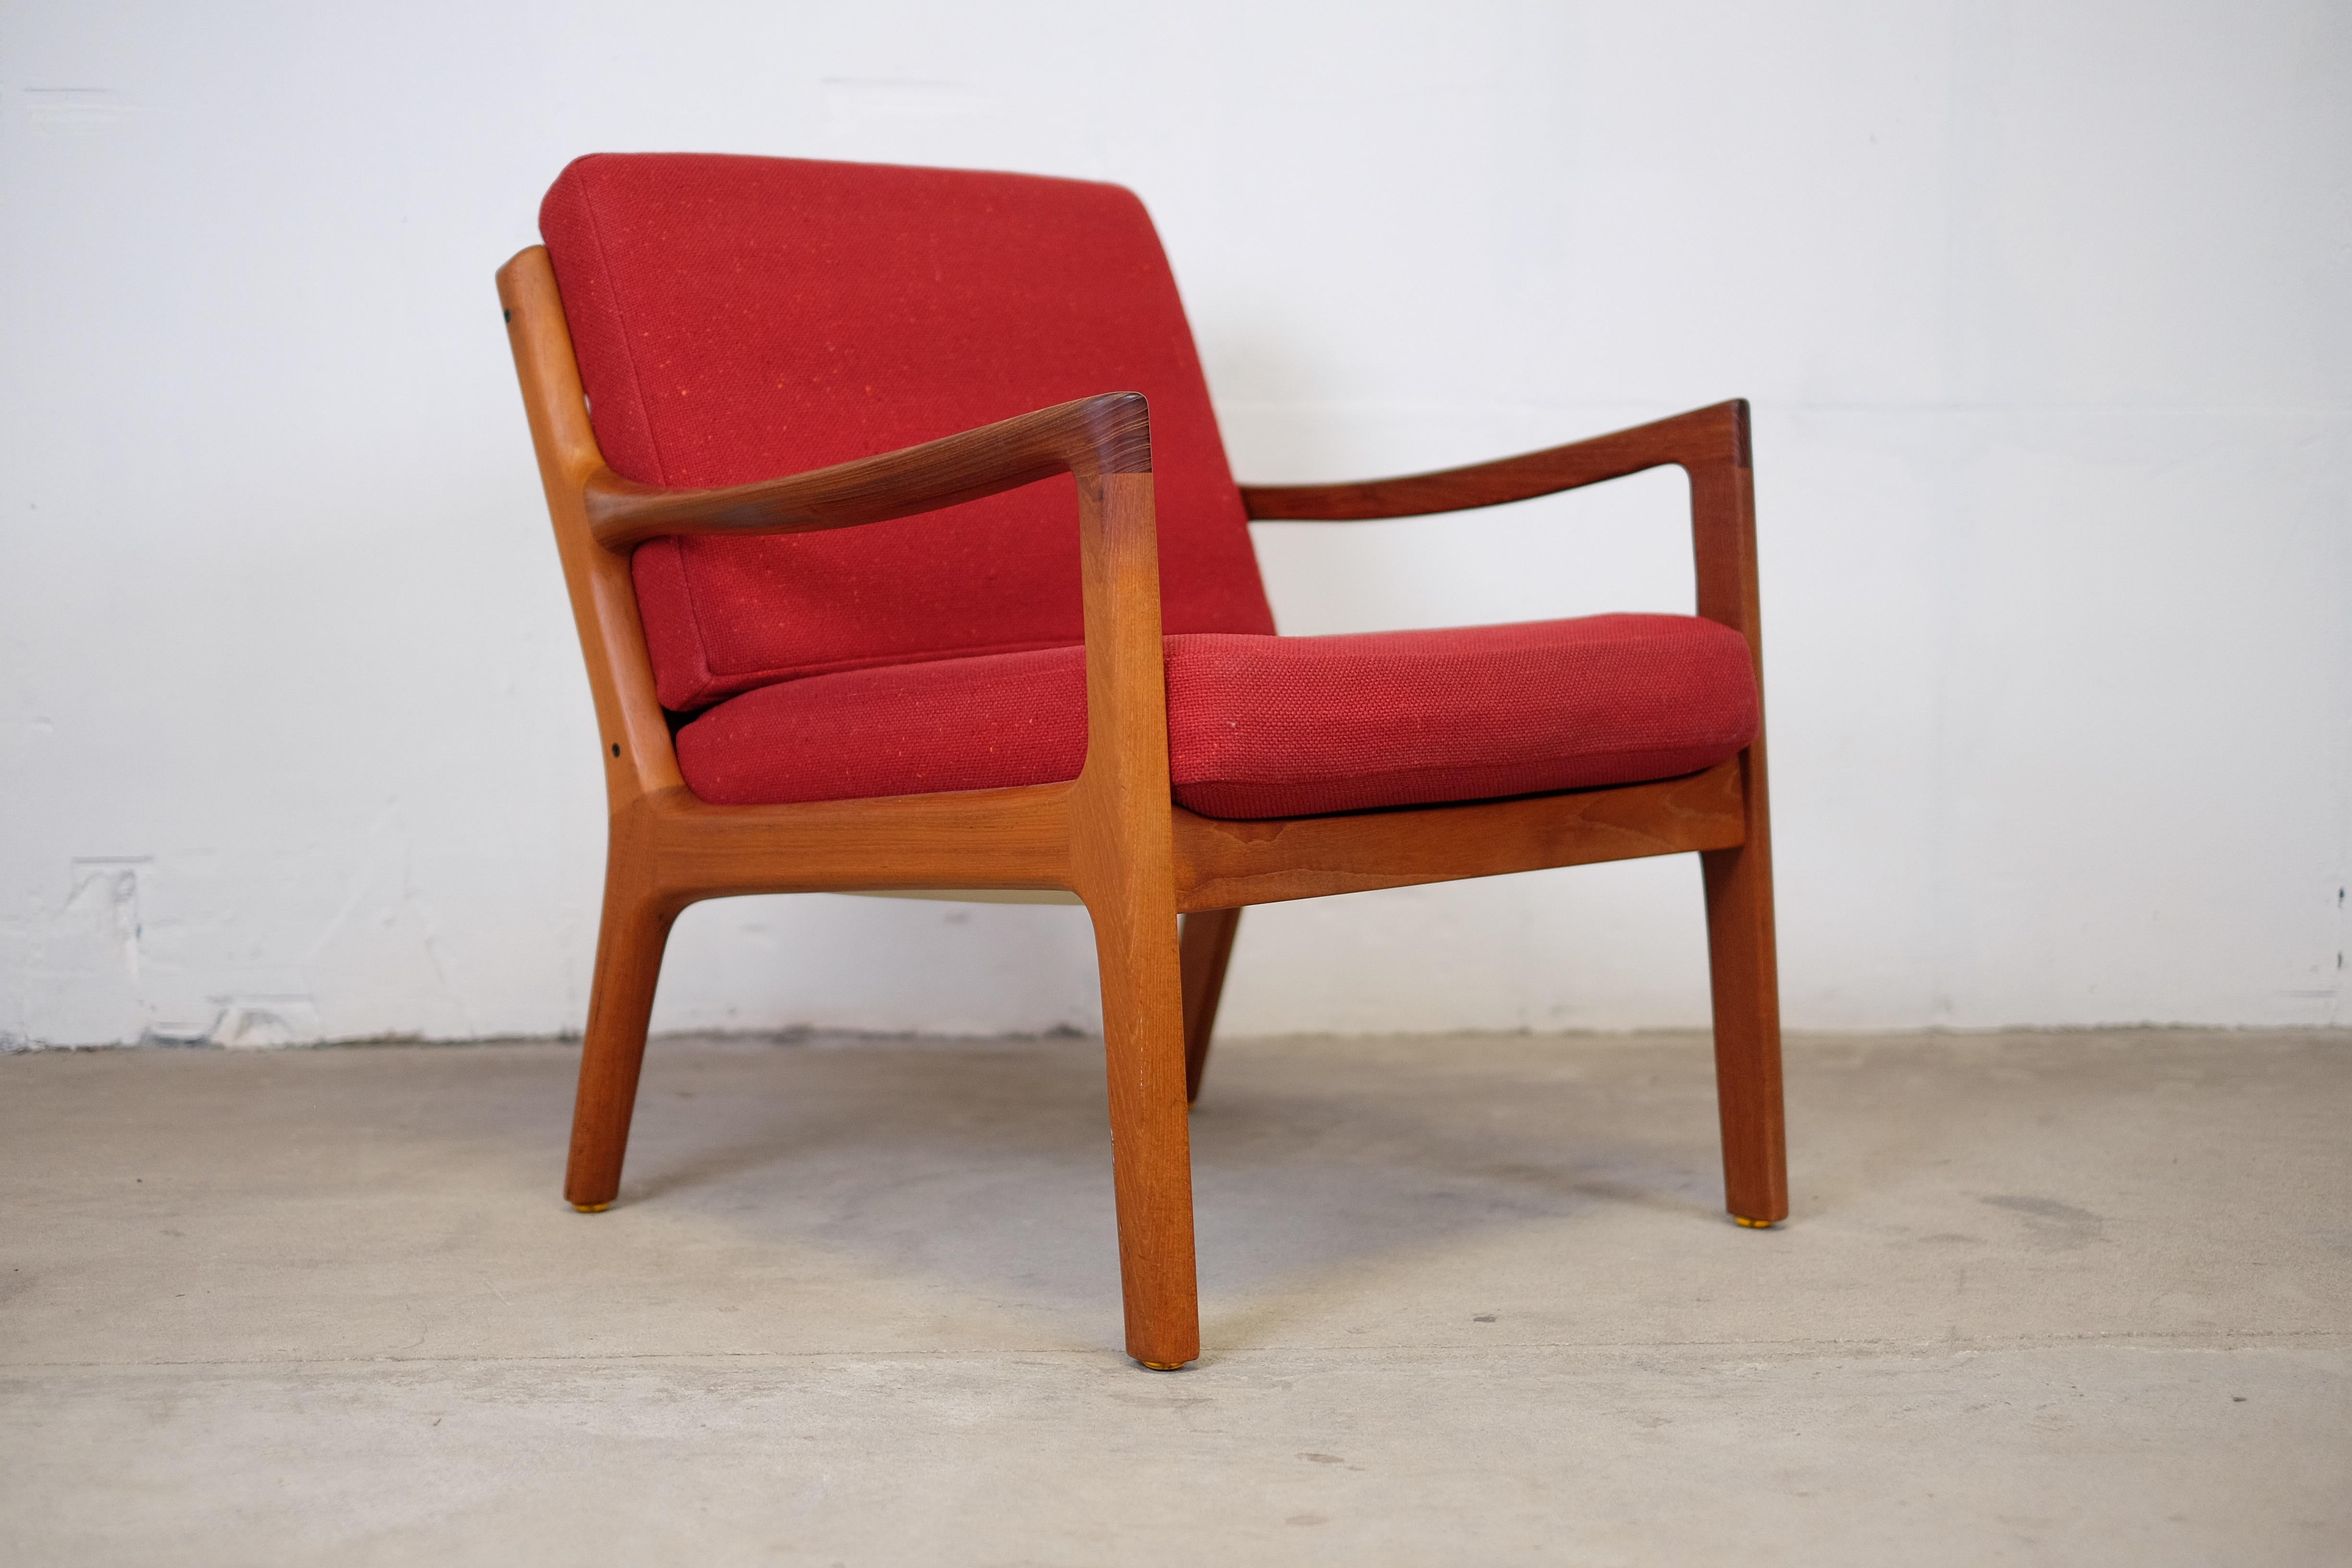 Ole Wanscher lounge chair in teak with ottoman, model senator by Cado Furniture.

The teak frame is very beautiful, and it's in very good condition. It's a great chair that has a good seating comfort. The chair are made in the golden era of